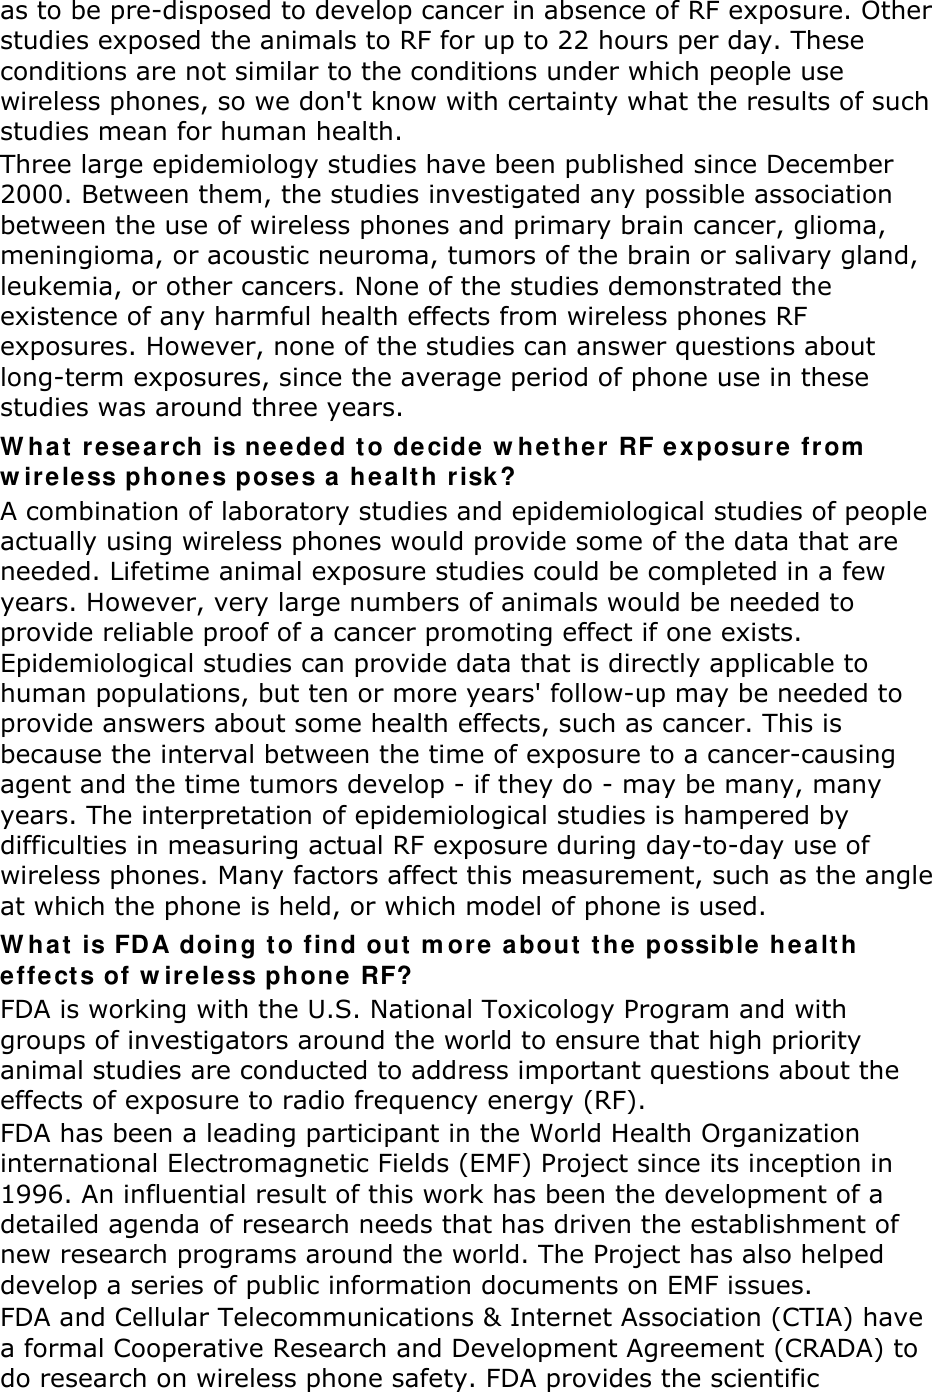 as to be pre-disposed to develop cancer in absence of RF exposure. Other studies exposed the animals to RF for up to 22 hours per day. These conditions are not similar to the conditions under which people use wireless phones, so we don&apos;t know with certainty what the results of such studies mean for human health. Three large epidemiology studies have been published since December 2000. Between them, the studies investigated any possible association between the use of wireless phones and primary brain cancer, glioma, meningioma, or acoustic neuroma, tumors of the brain or salivary gland, leukemia, or other cancers. None of the studies demonstrated the existence of any harmful health effects from wireless phones RF exposures. However, none of the studies can answer questions about long-term exposures, since the average period of phone use in these studies was around three years. W hat re search  is neede d t o de cide w hether  RF e xposure fr om  w ireless phones poses a hea lt h r isk ? A combination of laboratory studies and epidemiological studies of people actually using wireless phones would provide some of the data that are needed. Lifetime animal exposure studies could be completed in a few years. However, very large numbers of animals would be needed to provide reliable proof of a cancer promoting effect if one exists. Epidemiological studies can provide data that is directly applicable to human populations, but ten or more years&apos; follow-up may be needed to provide answers about some health effects, such as cancer. This is because the interval between the time of exposure to a cancer-causing agent and the time tumors develop - if they do - may be many, many years. The interpretation of epidemiological studies is hampered by difficulties in measuring actual RF exposure during day-to-day use of wireless phones. Many factors affect this measurement, such as the angle at which the phone is held, or which model of phone is used. W hat is FDA doing t o find out  m ore  about  t he  possible healt h effect s of w ire less phone  RF? FDA is working with the U.S. National Toxicology Program and with groups of investigators around the world to ensure that high priority animal studies are conducted to address important questions about the effects of exposure to radio frequency energy (RF). FDA has been a leading participant in the World Health Organization international Electromagnetic Fields (EMF) Project since its inception in 1996. An influential result of this work has been the development of a detailed agenda of research needs that has driven the establishment of new research programs around the world. The Project has also helped develop a series of public information documents on EMF issues. FDA and Cellular Telecommunications &amp; Internet Association (CTIA) have a formal Cooperative Research and Development Agreement (CRADA) to do research on wireless phone safety. FDA provides the scientific 